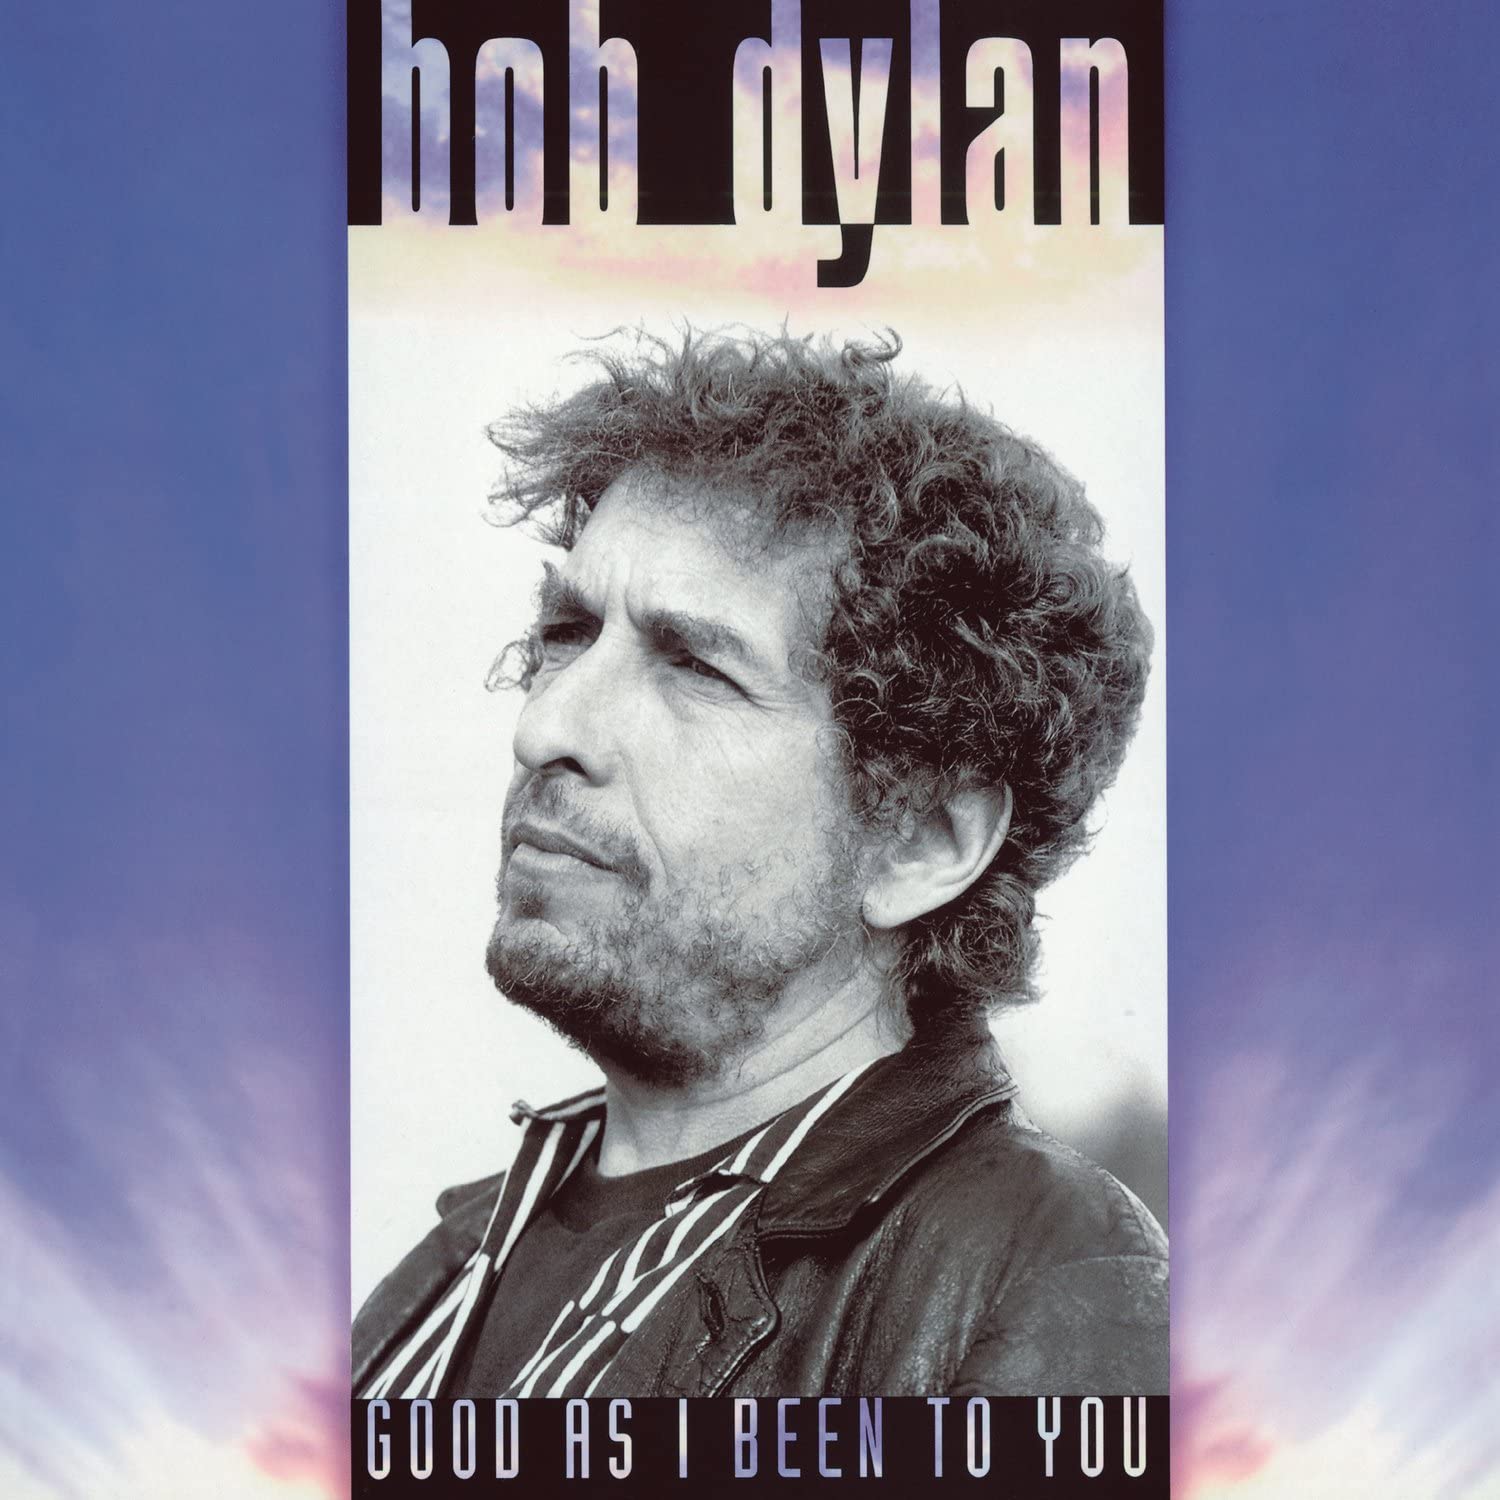 Bob Dylan ‎– Good As I Been To You VINYL LP